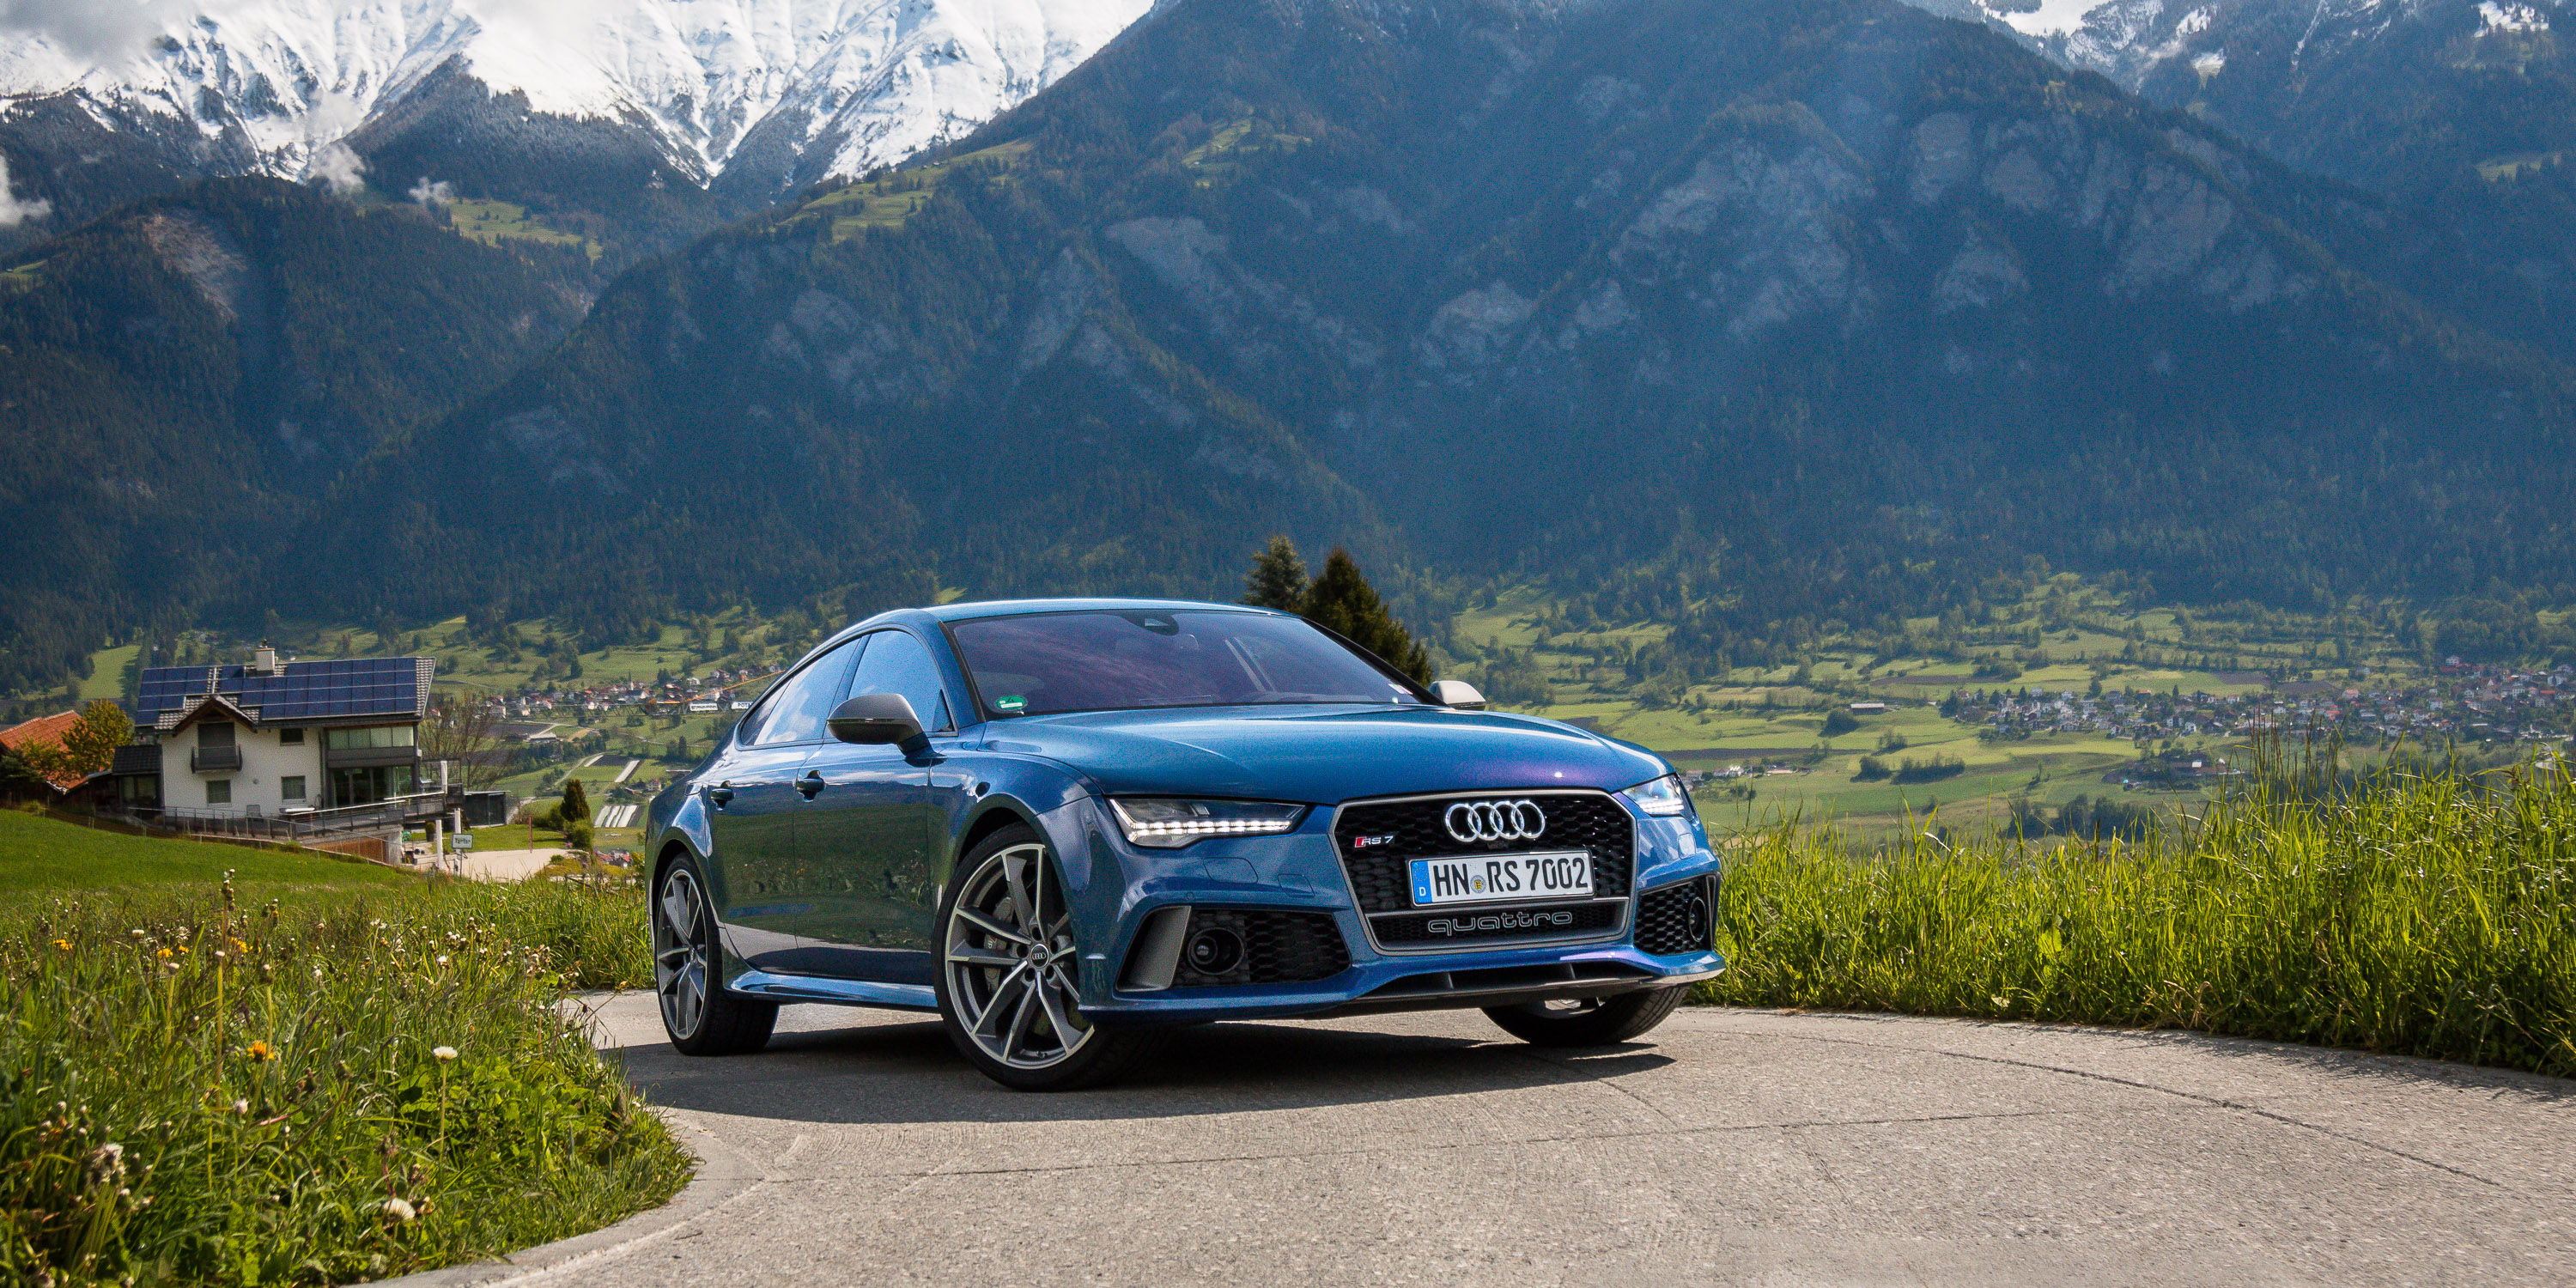 Unrivaled Power: The 2016 Audi RS7 Sportback Performance